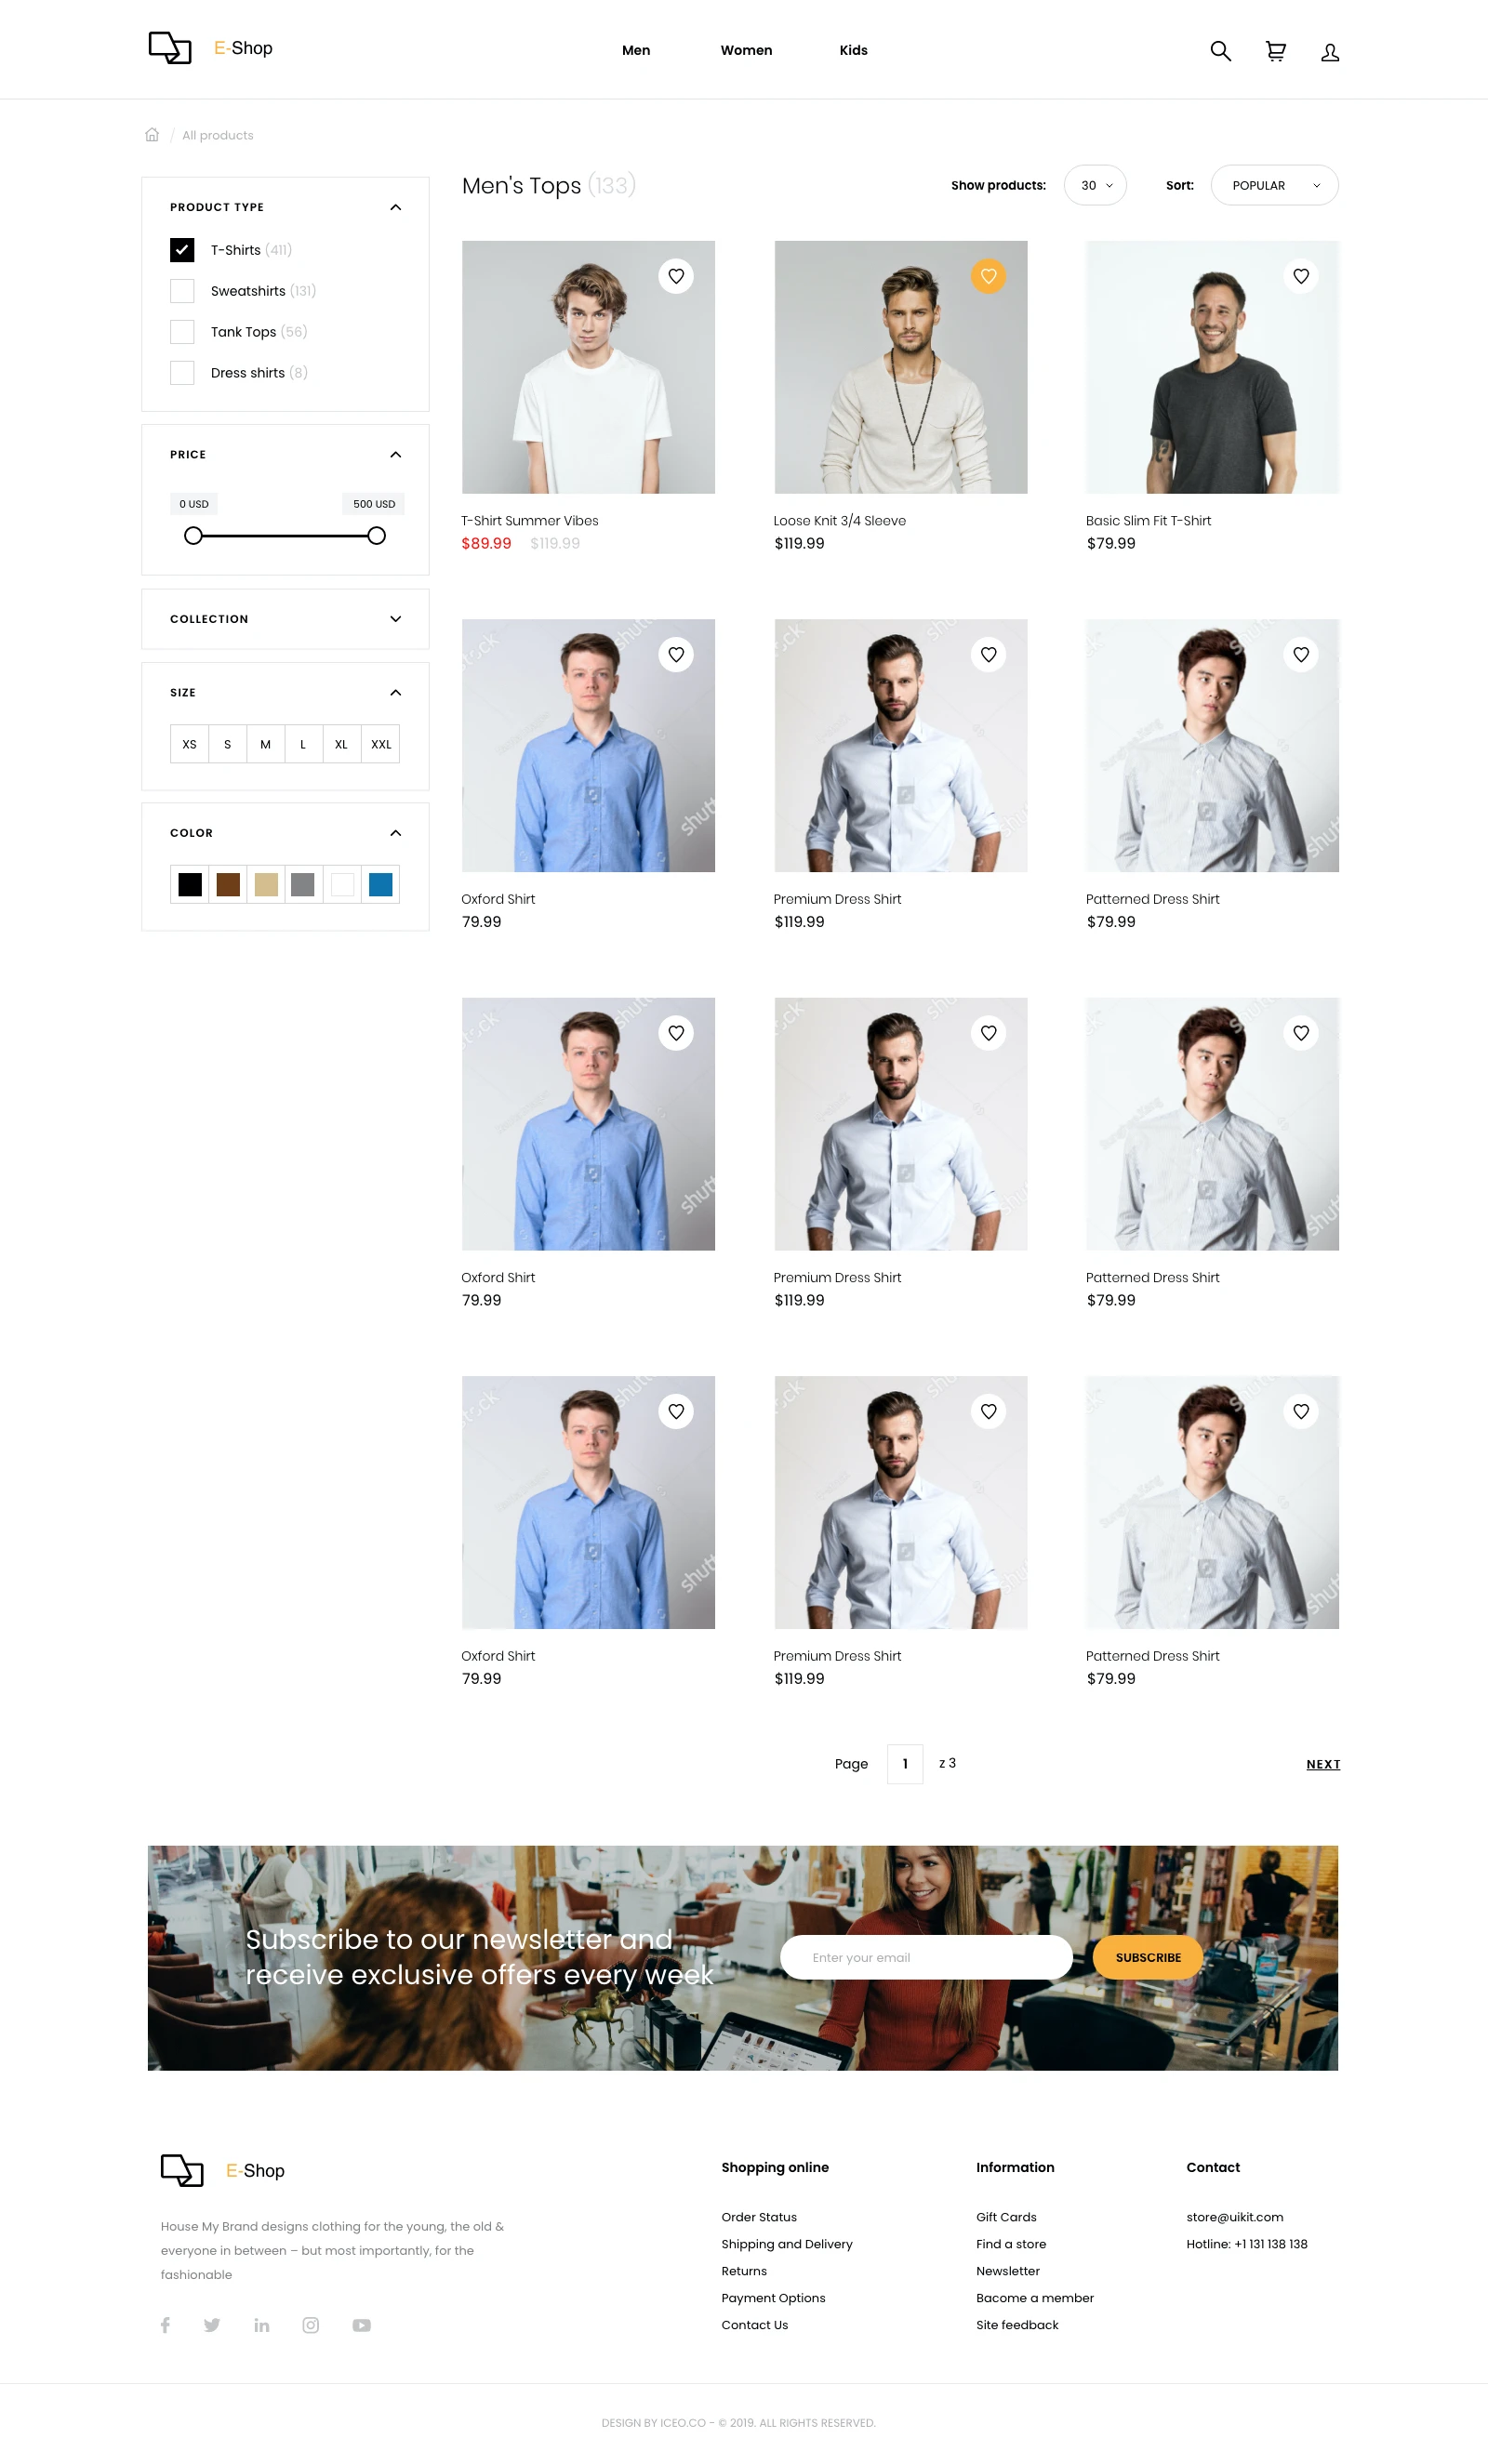 Responsive eCommerce UI Kit for Adobe XD - Designed for both web and mobile, this UI kit redefines user experience through simplicity and calculated design choices. This freebie contains everything an online store needs to get up and running.